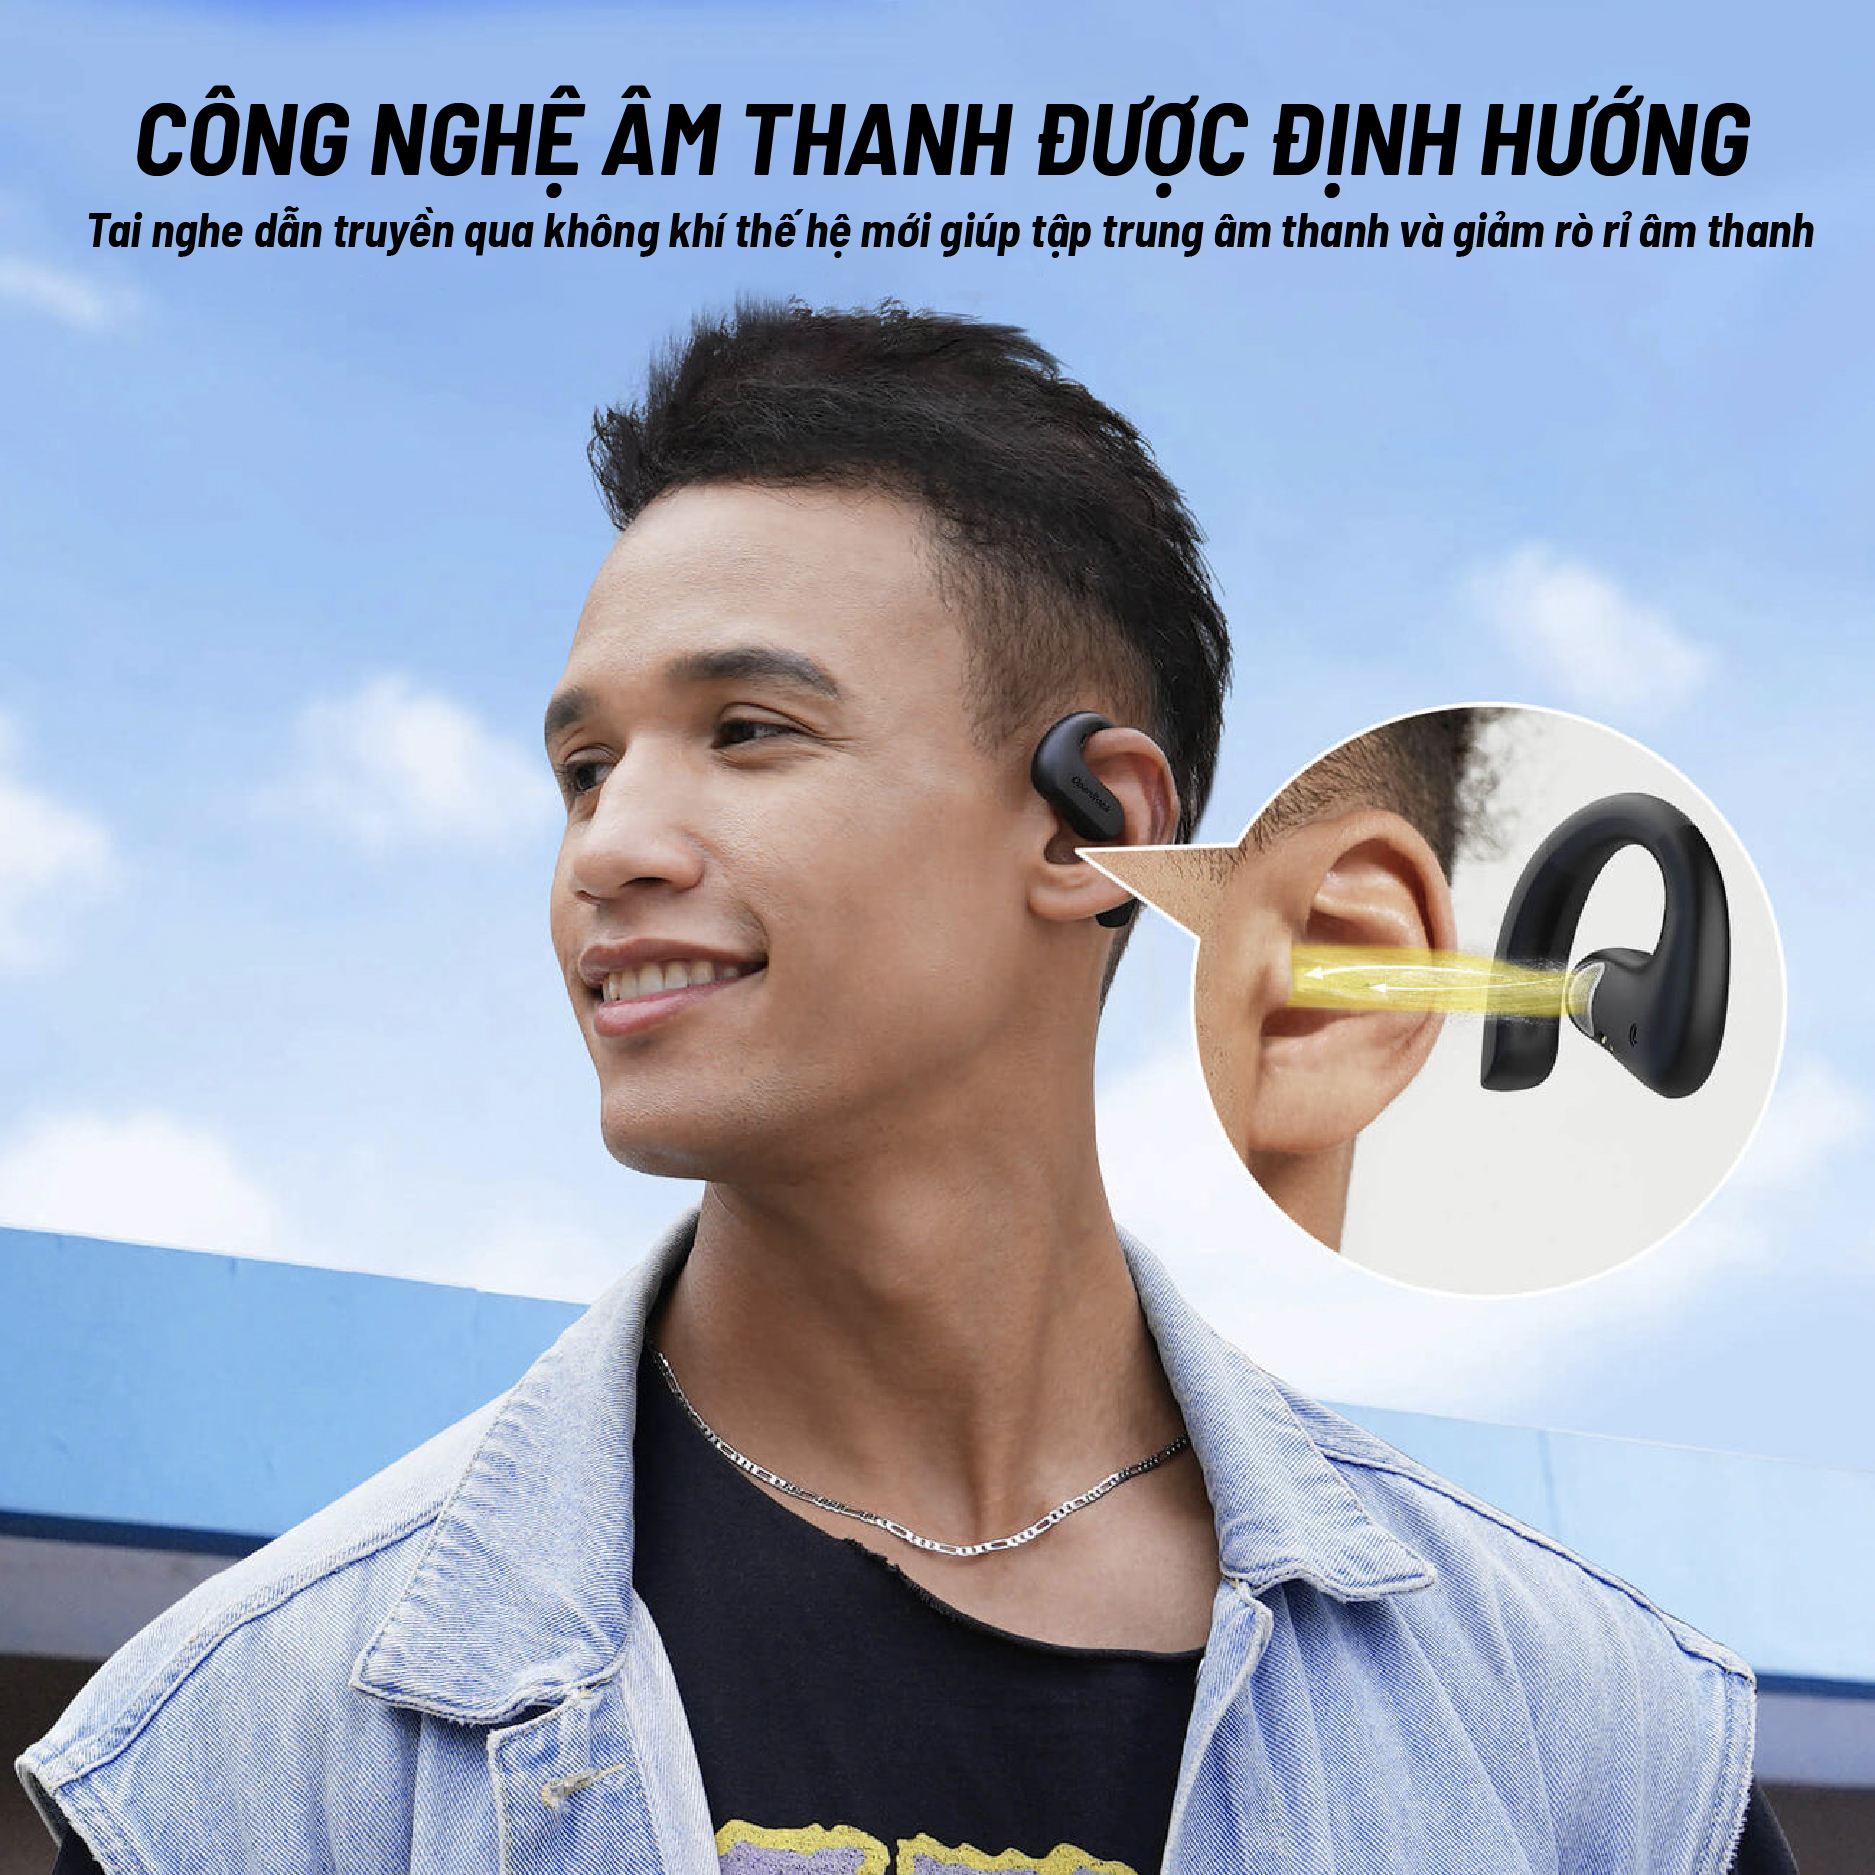 OneOdio OpenRock S | Tai Nghe Bluetooth Thể Thao Chống Nước IPX5